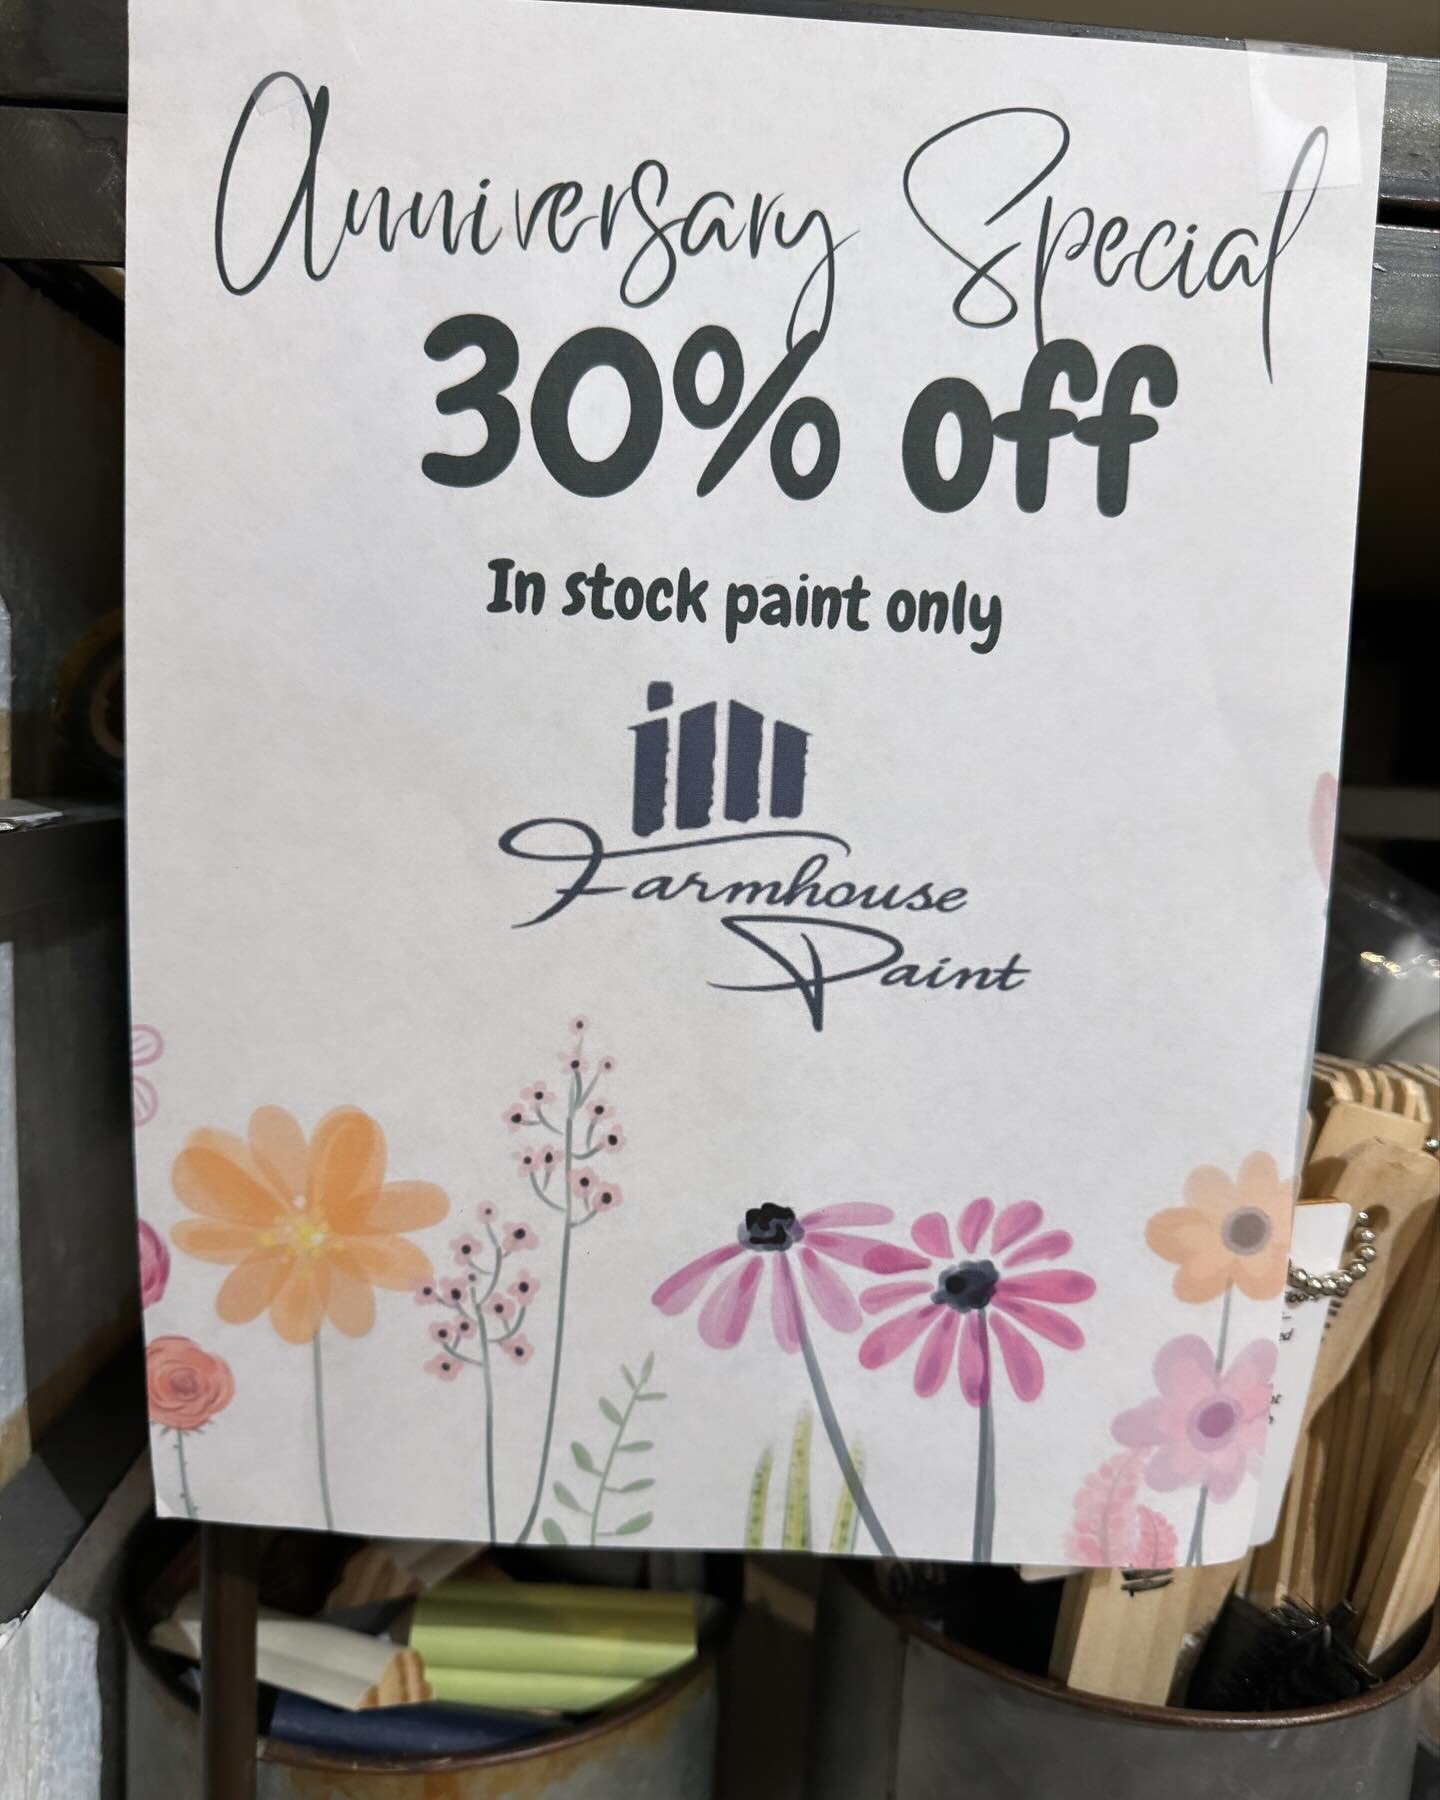 Sale spotlight! Get 30%off Farmhouse paint and 10%off  AK Republic! Today only! 
Open 10-6 today!